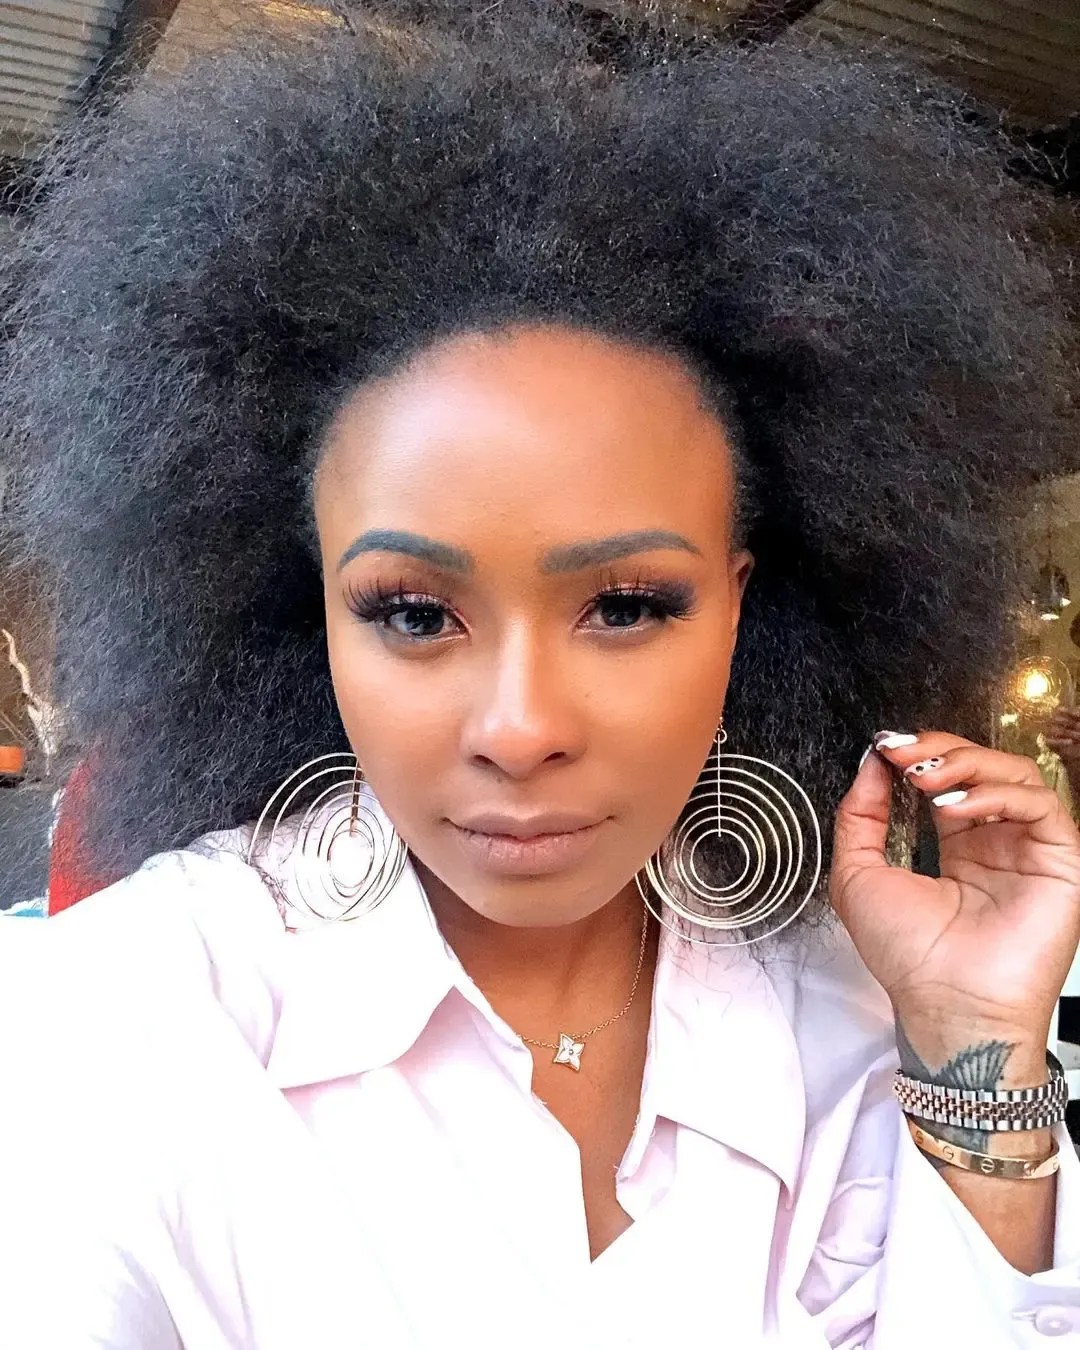 Plastic surgery for Boity Thulo after Bujy Bikwa rearranged her face